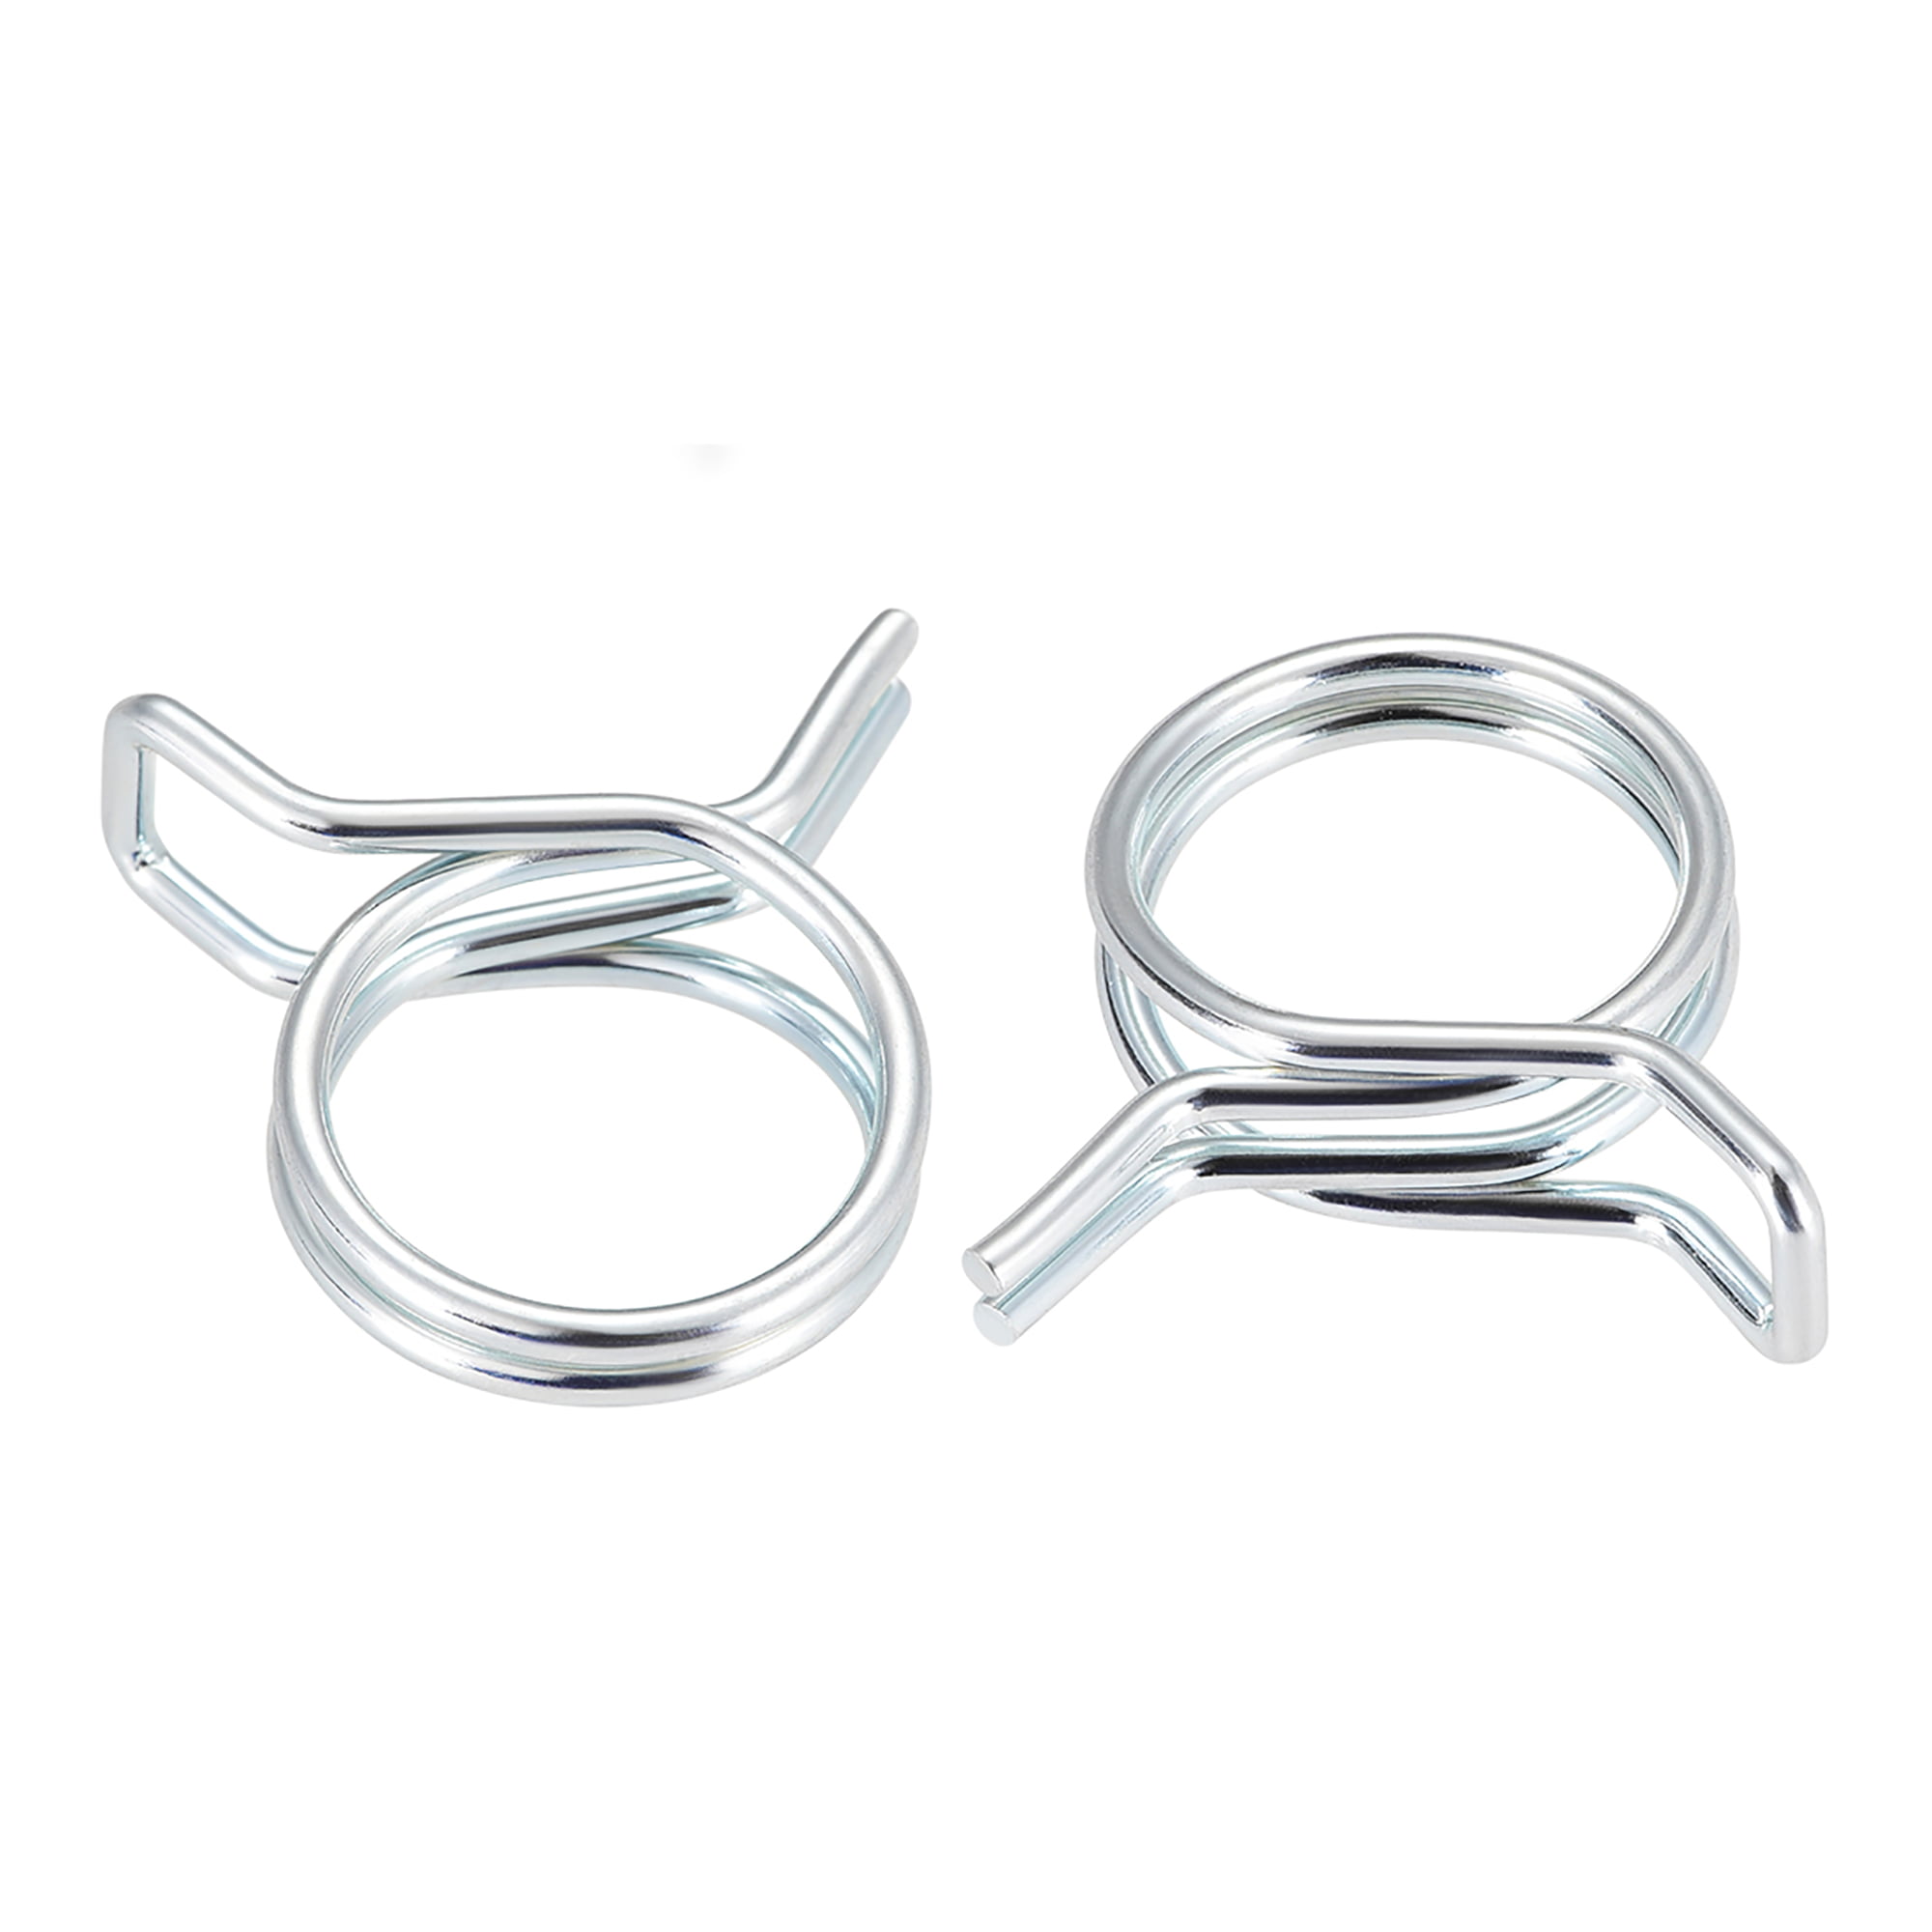 Double Wire Motorcycle ATV 16mm Fuel Line Hose Tube Spring Clips Clamp